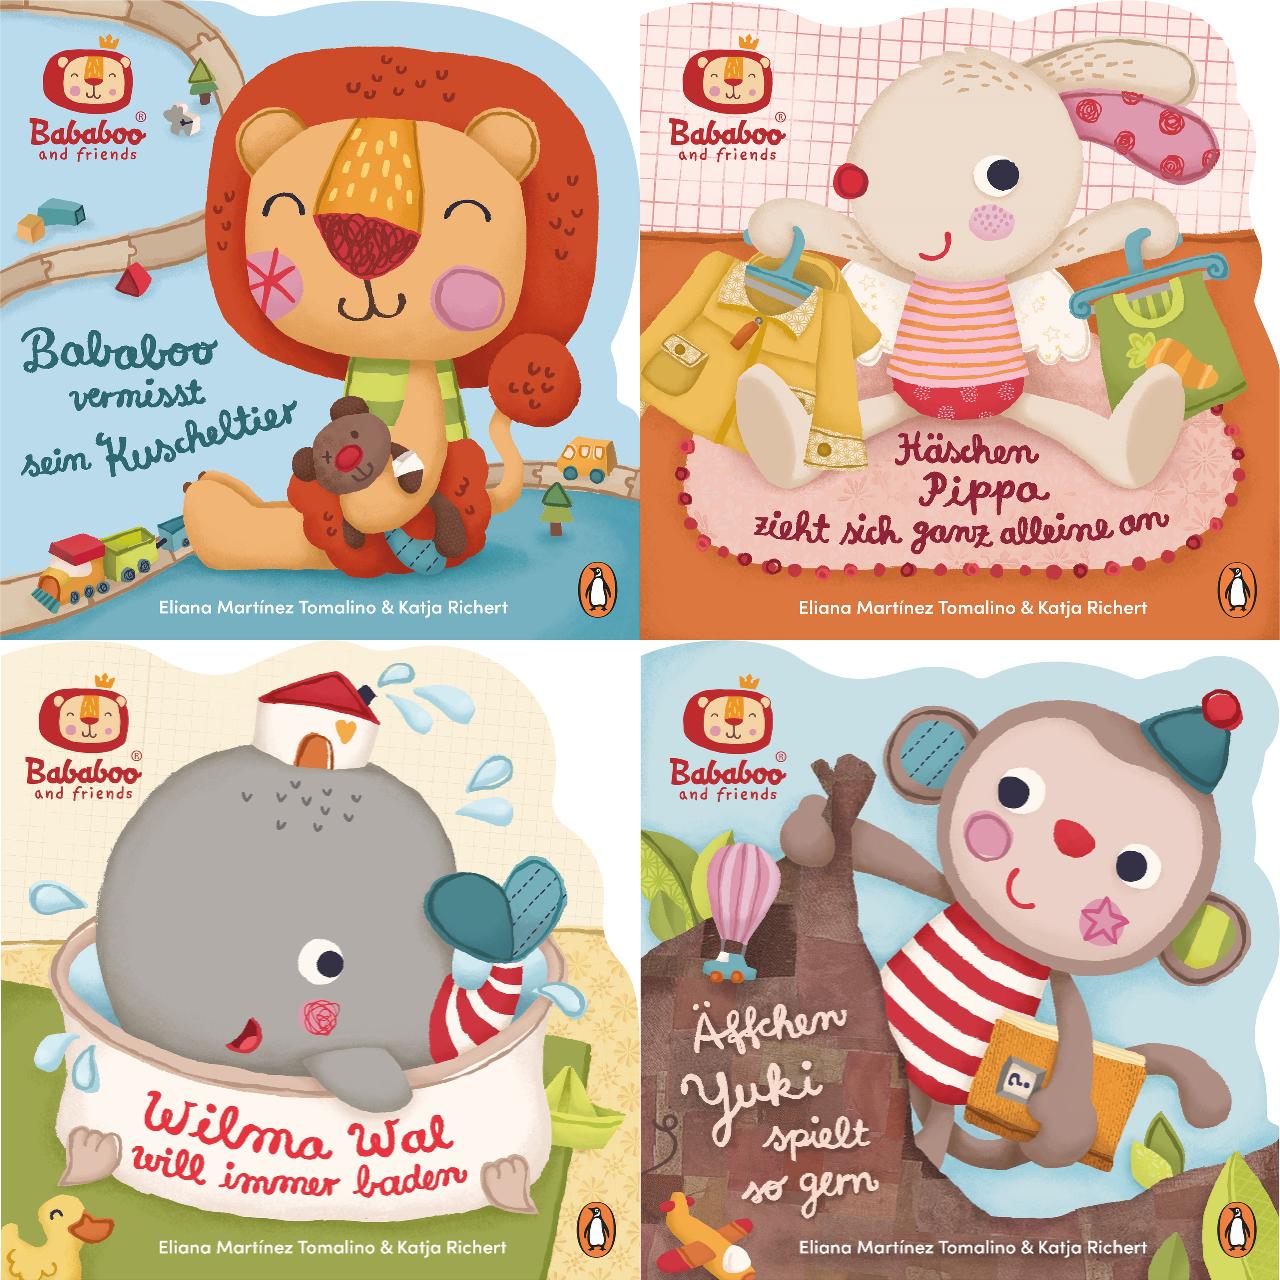 Bababoo and friends Band 1-4 plus 1 exklusives Postkartenset